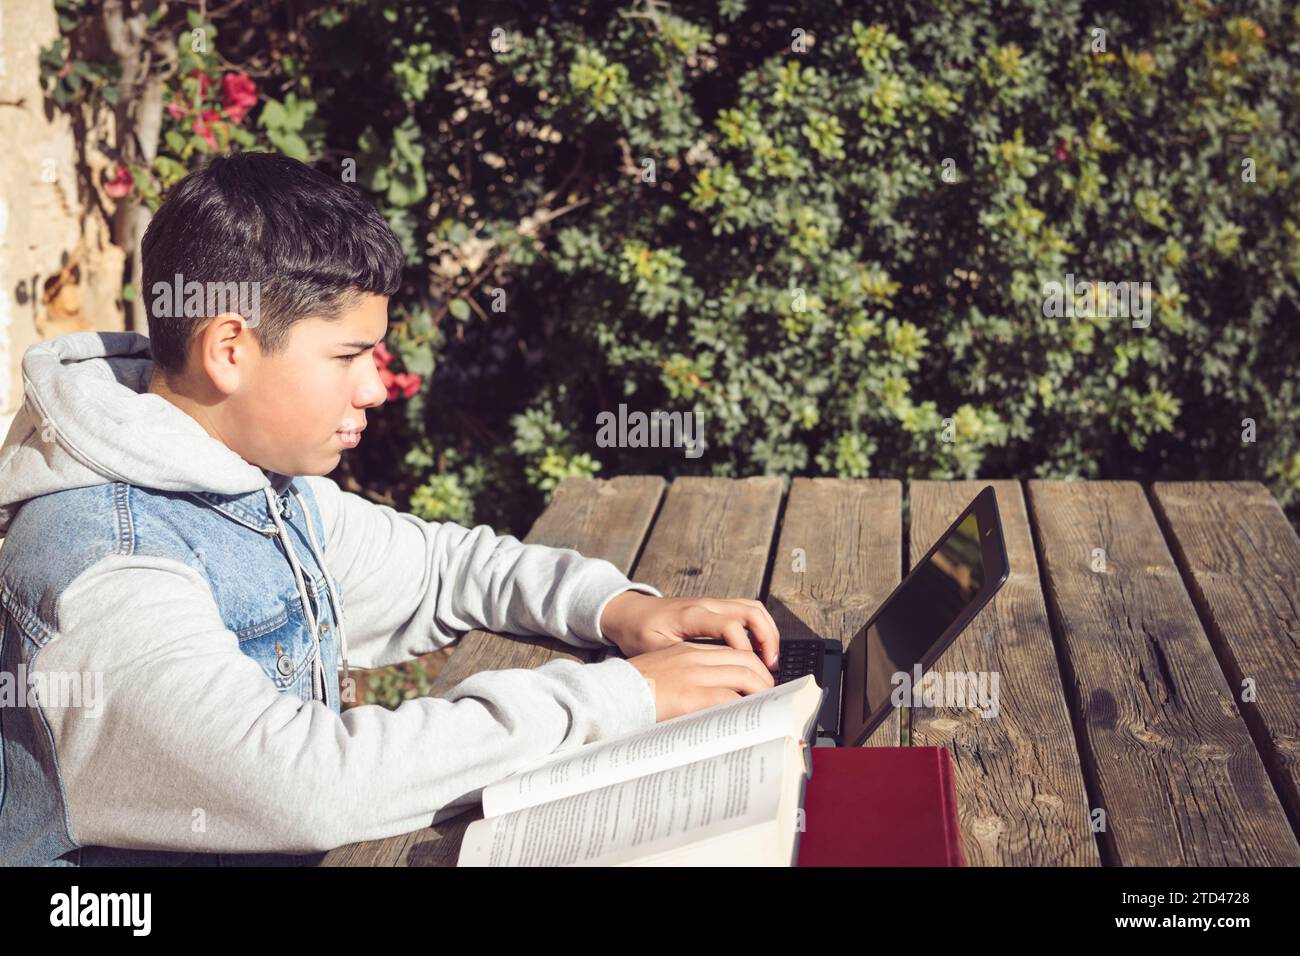 A focused individual works on a laptop at a wooden table outdoors, with sunlight and greenery around Stock Photo